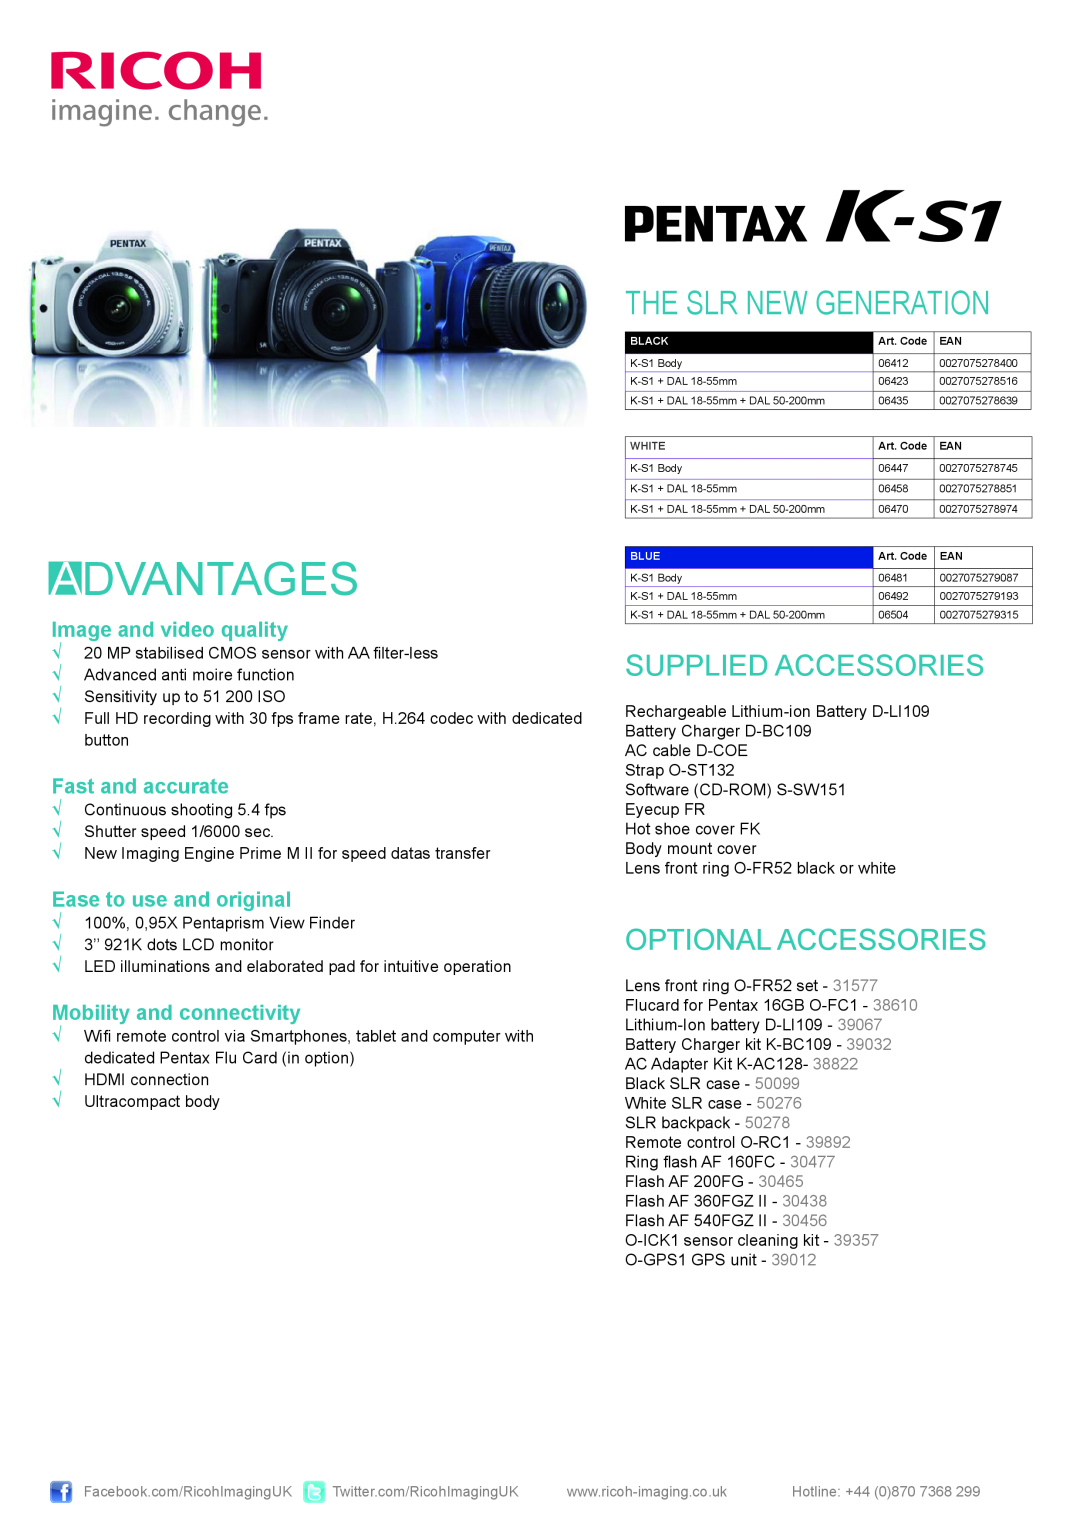 Pentax 06578 manual Advantages, The Slr New Generation, Supplied Accessories, Optional Accessories, Fast and accurate 